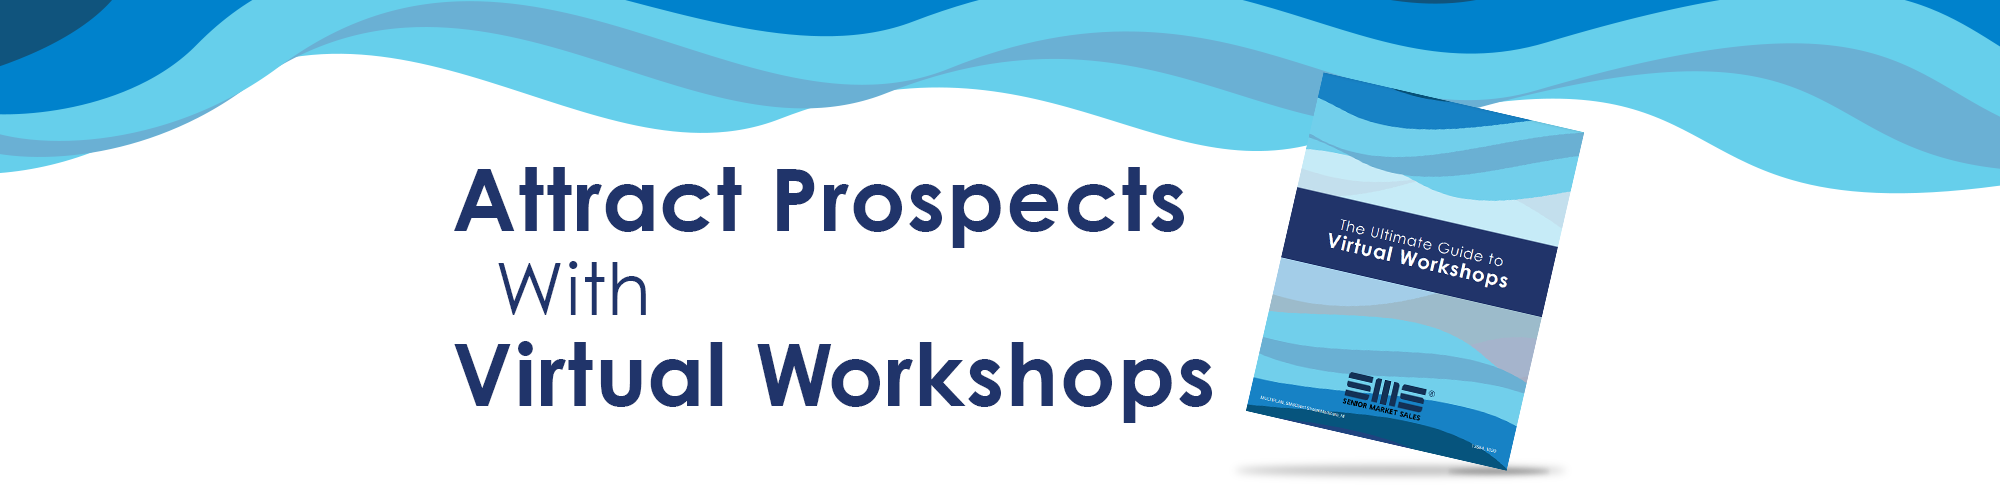 Attract Prospects With Virtual Workshops